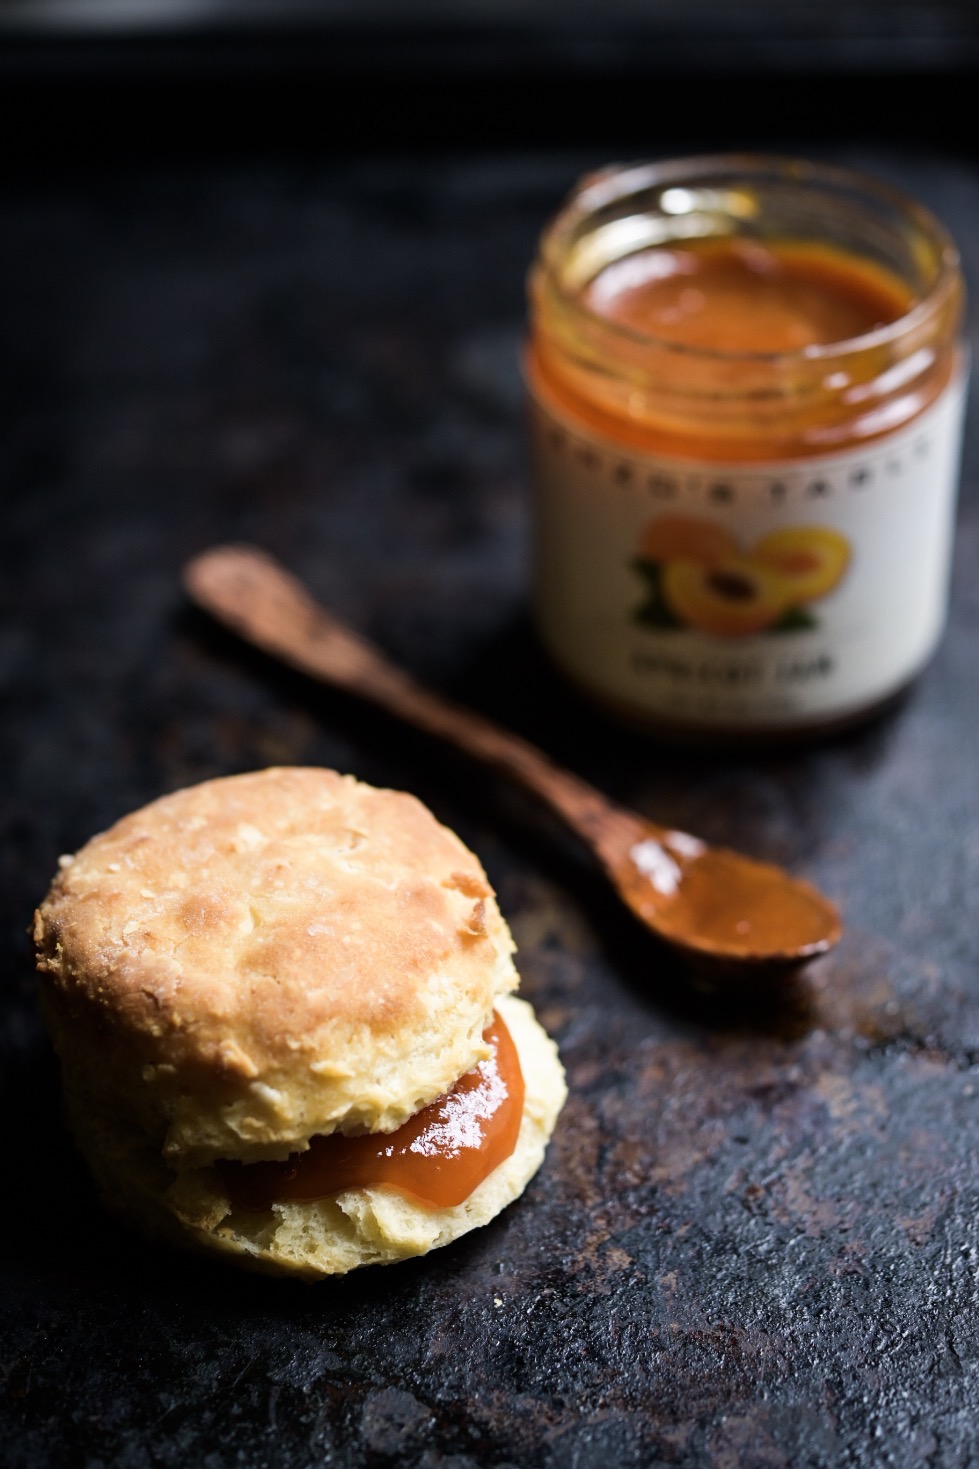 Fresh, flaky buttermilk biscuit with Enzo's Table apricot jam